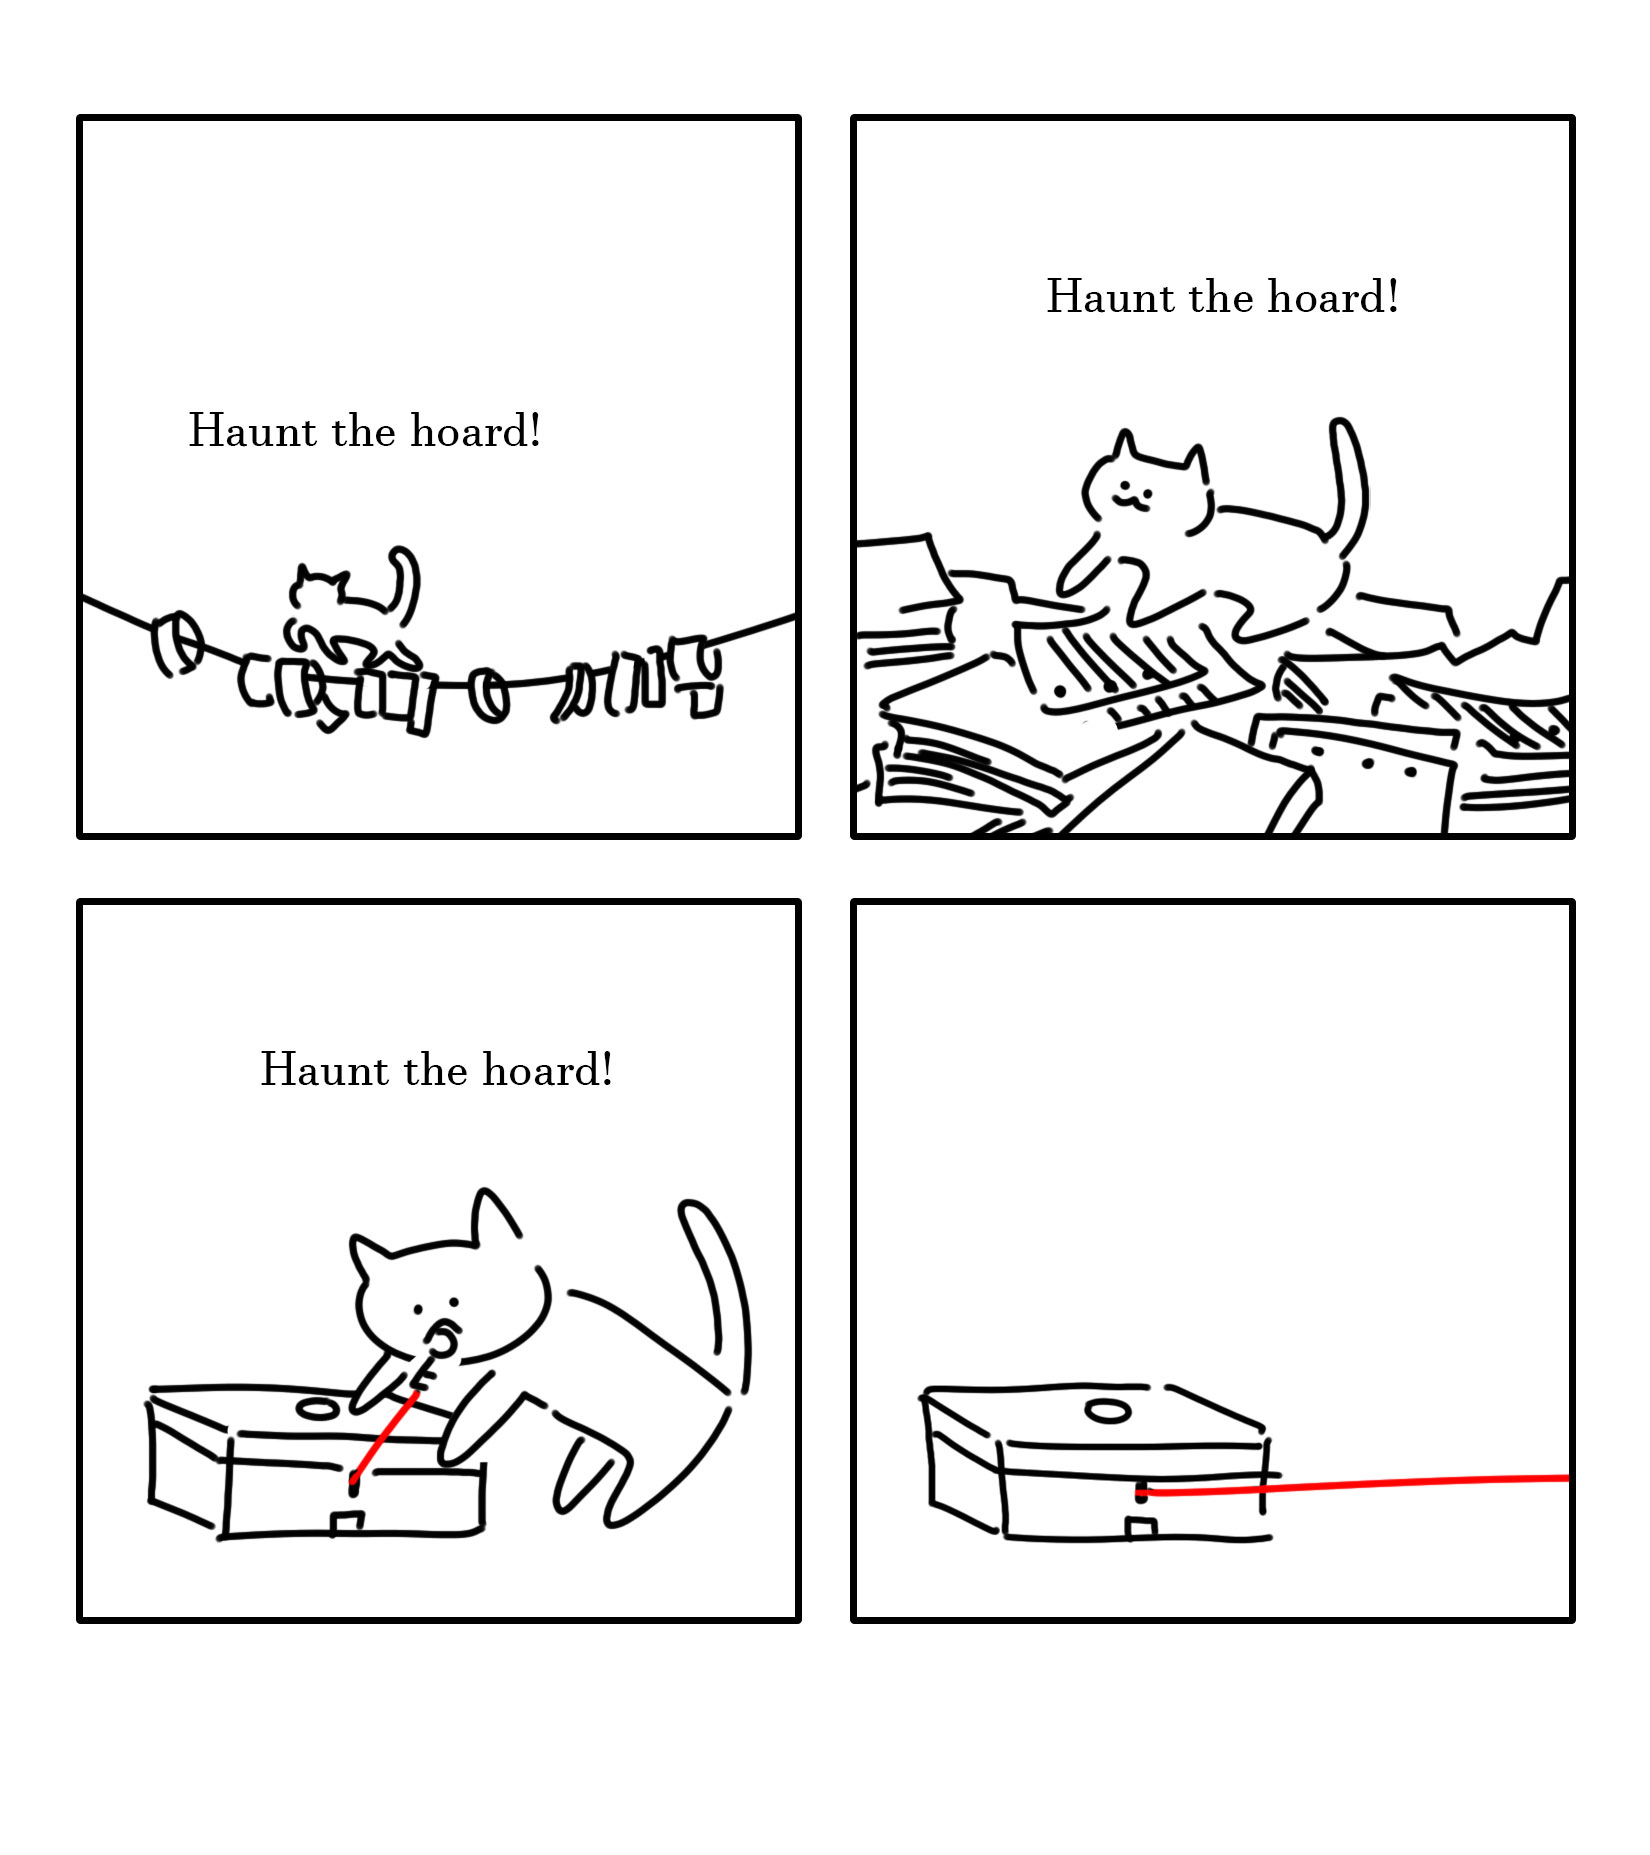 Black and white comic with simple digital drawings. Panel 1: Silhouette of a white cat in the distance walking along a clothesline of tape rolls. It seems to be smiling with a mouth shaped like a 3. Text: Haunt the hoard! Panel 2: A white cat standing on a pile of books, lined paper with 3 hole punches, and blank paper with 3 hole punches. It seems to be smiling with a mouth shaped like a 3. Text: Haunt the hoard! Panel 3: White cat with its front paws perched on a flat box, pulling a key with its mouth. The key is attatched by one end to a keyhole in the front of the box with a red string. The cat seems to be frowning. Panel 4: The box is left in frame. The string coming from the keyhole stretches off the panel to the right.